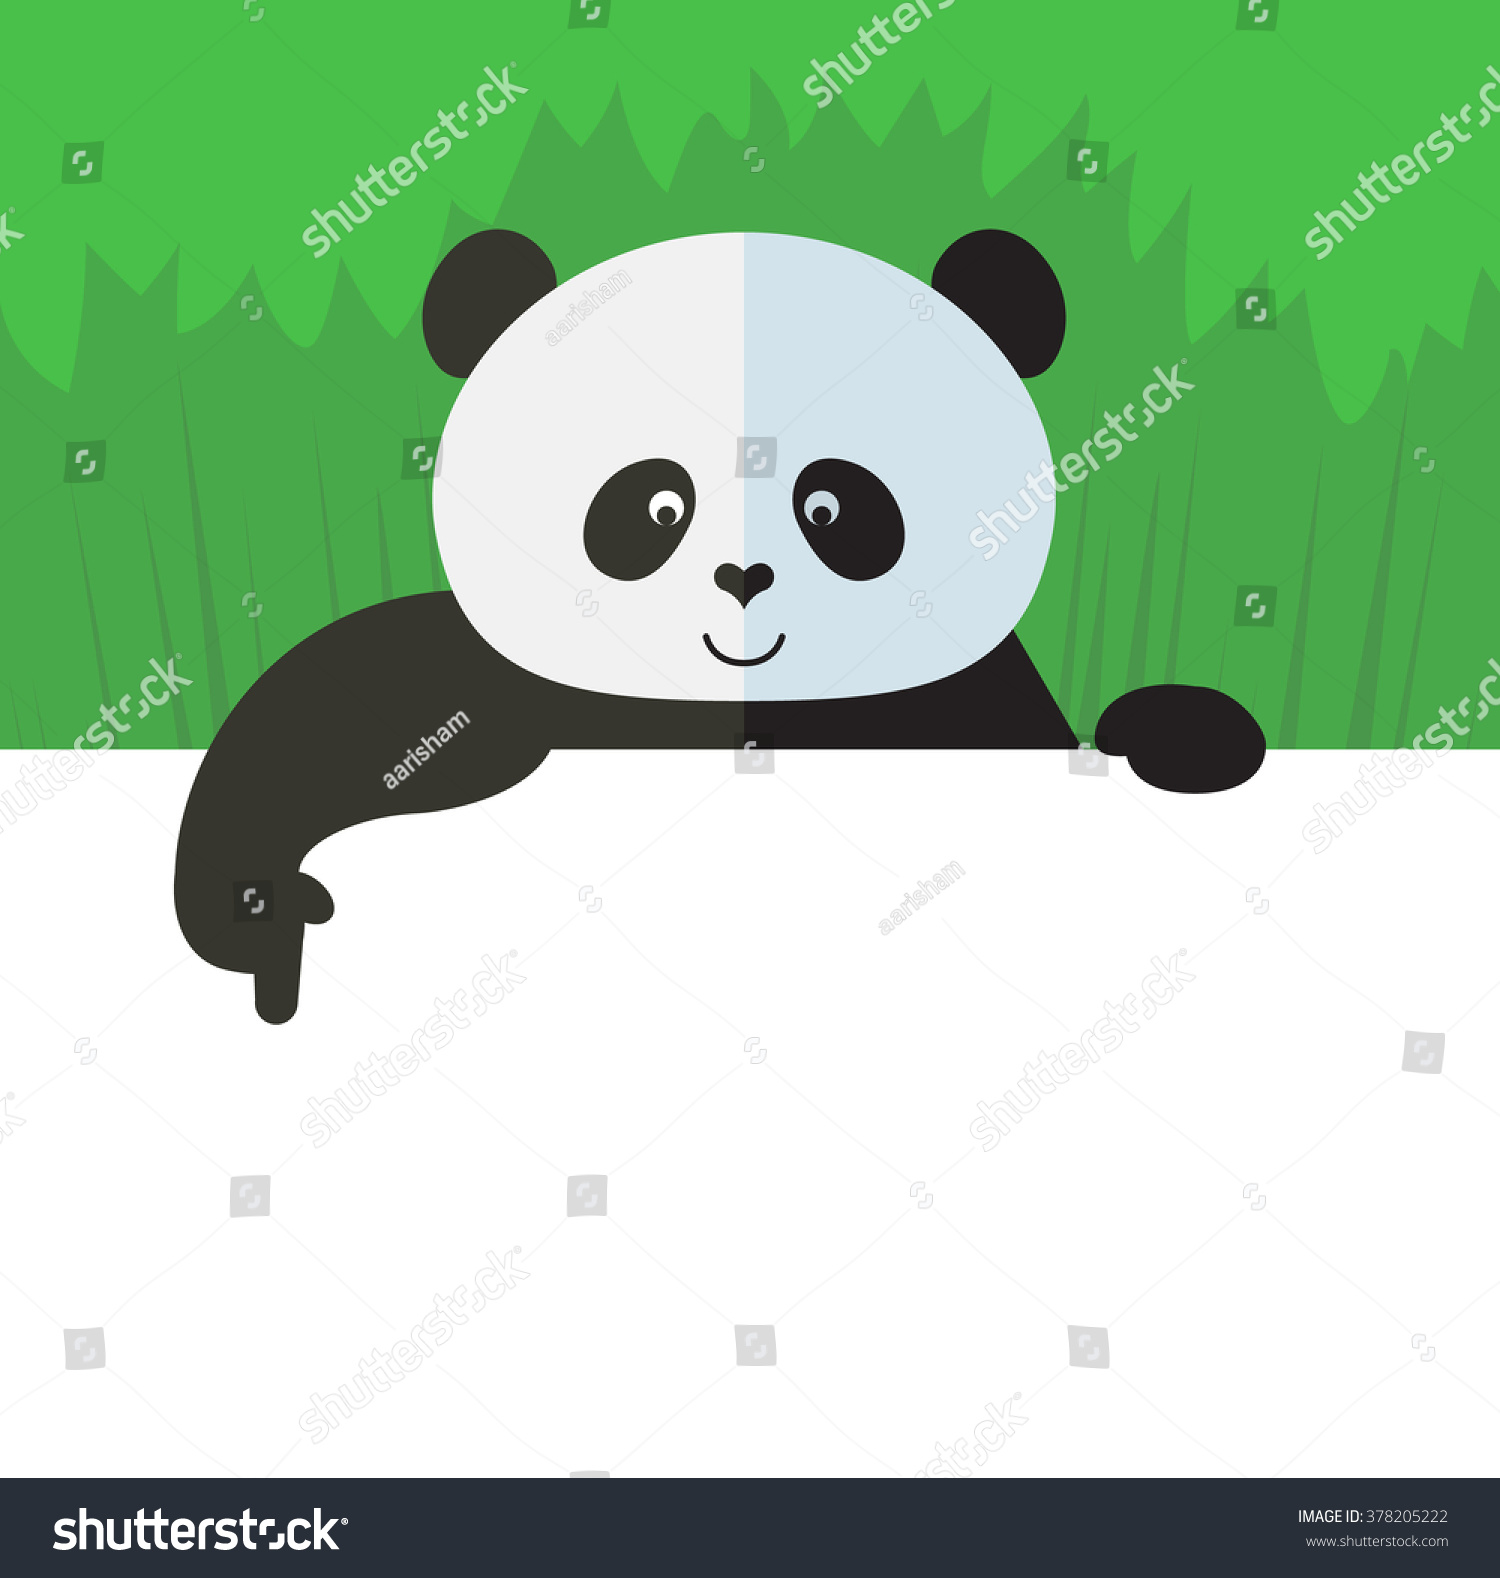 SVG of Panda holding a blank sheet pointing. Flat style vector illustration on Green background. National emblem of China svg